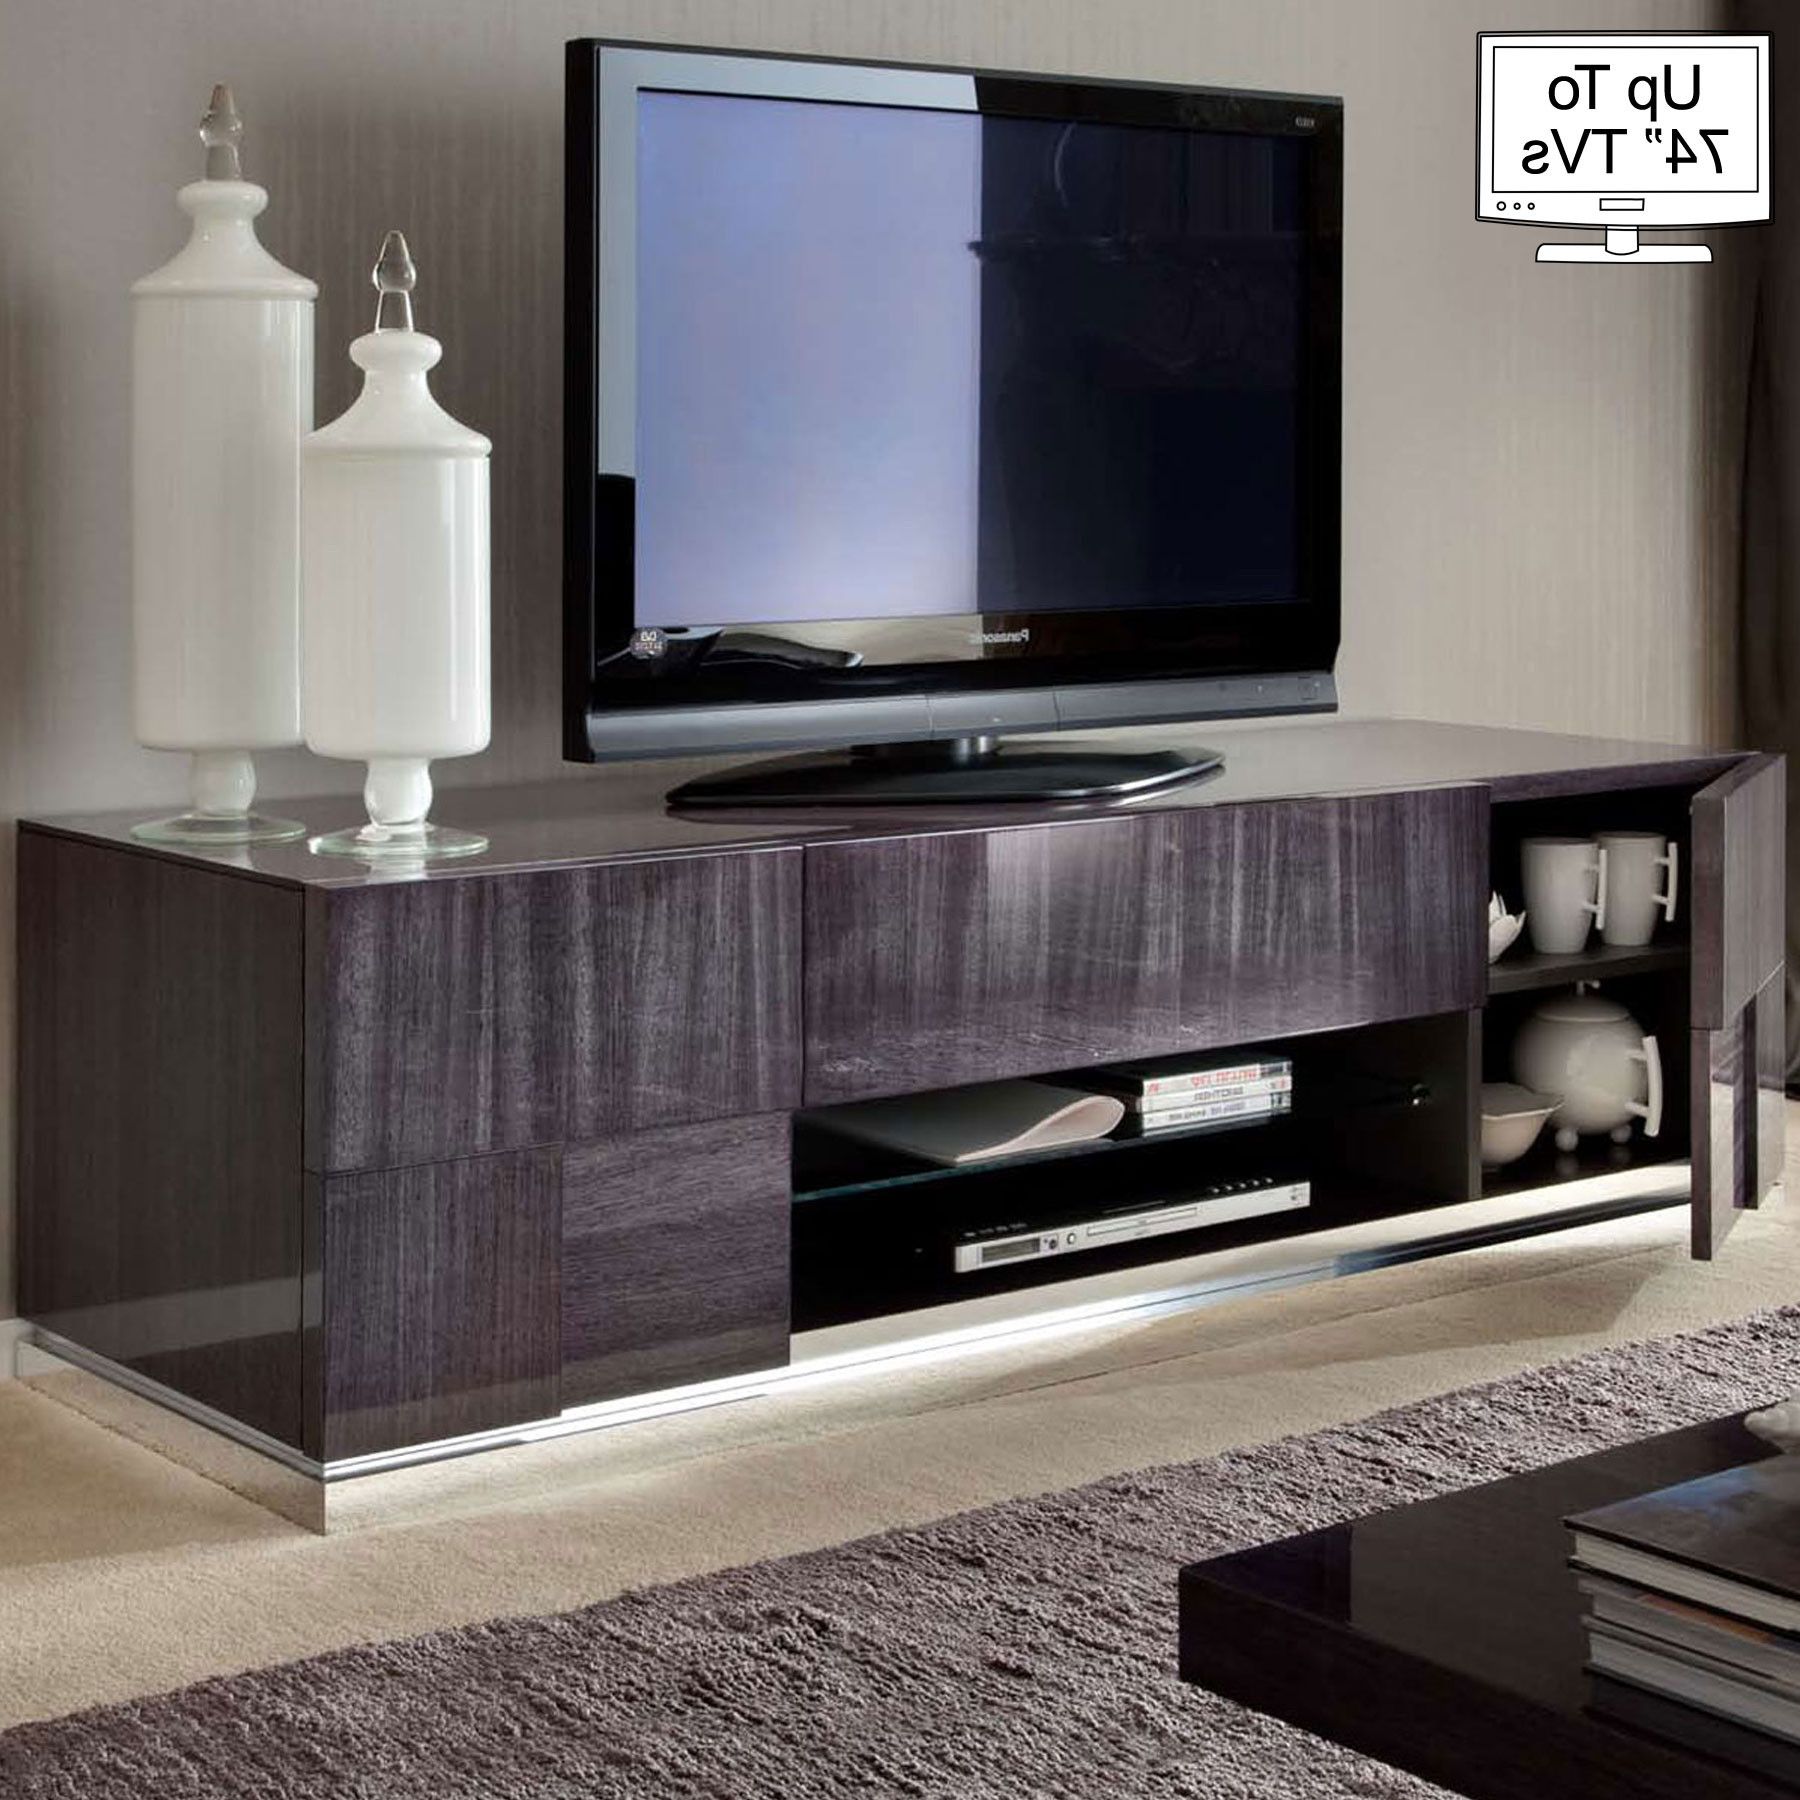 Trendy Monza High Gloss Tv Stand For Up To 74" Tvs Regarding High Gloss Tv Cabinets (View 1 of 20)